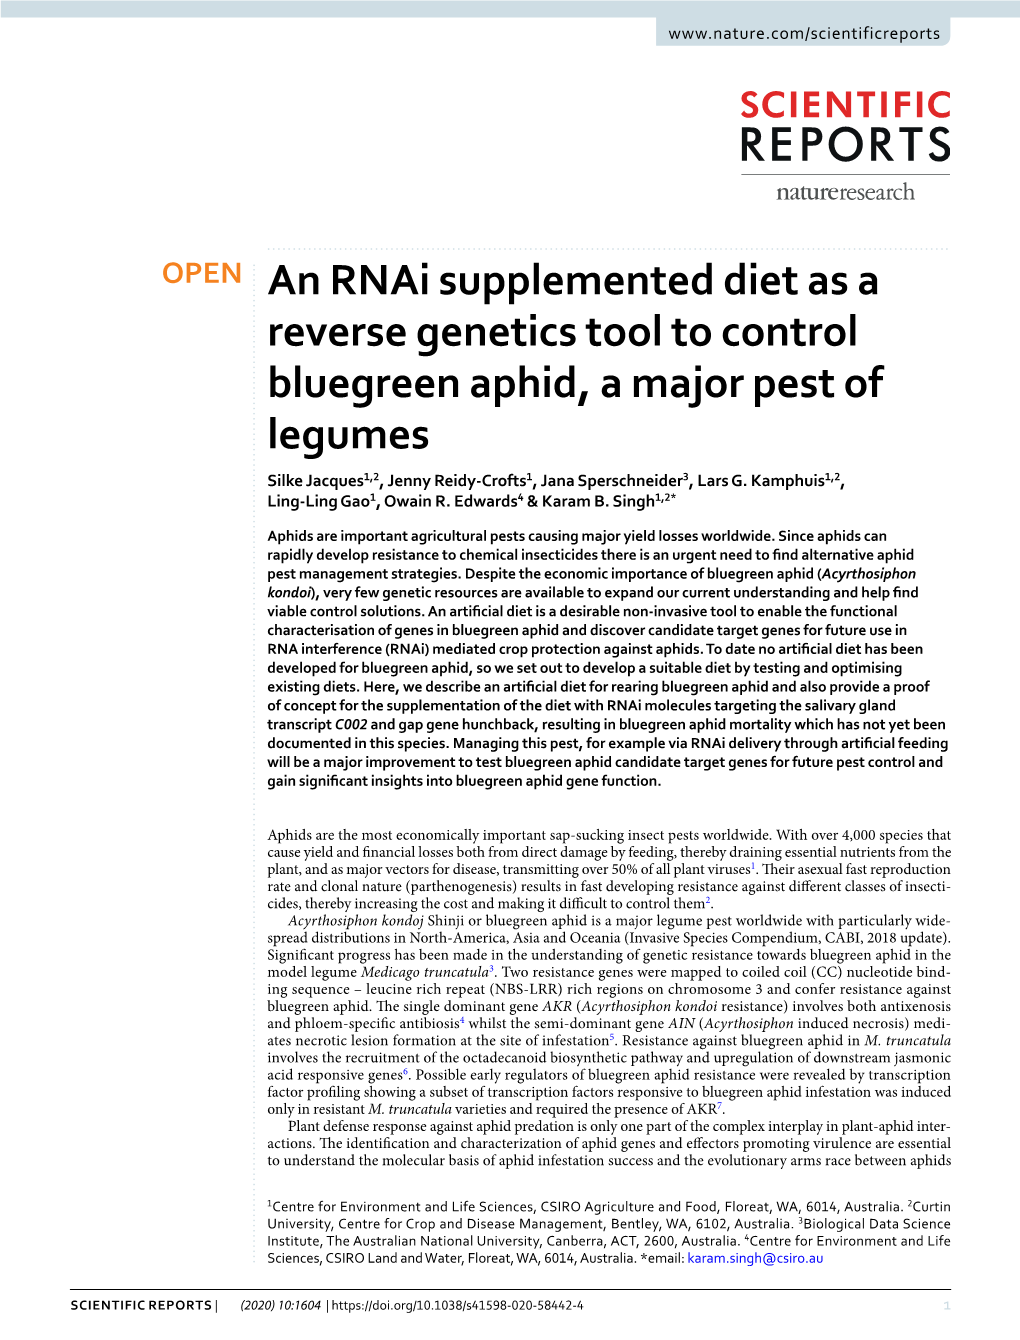 An Rnai Supplemented Diet As a Reverse Genetics Tool to Control